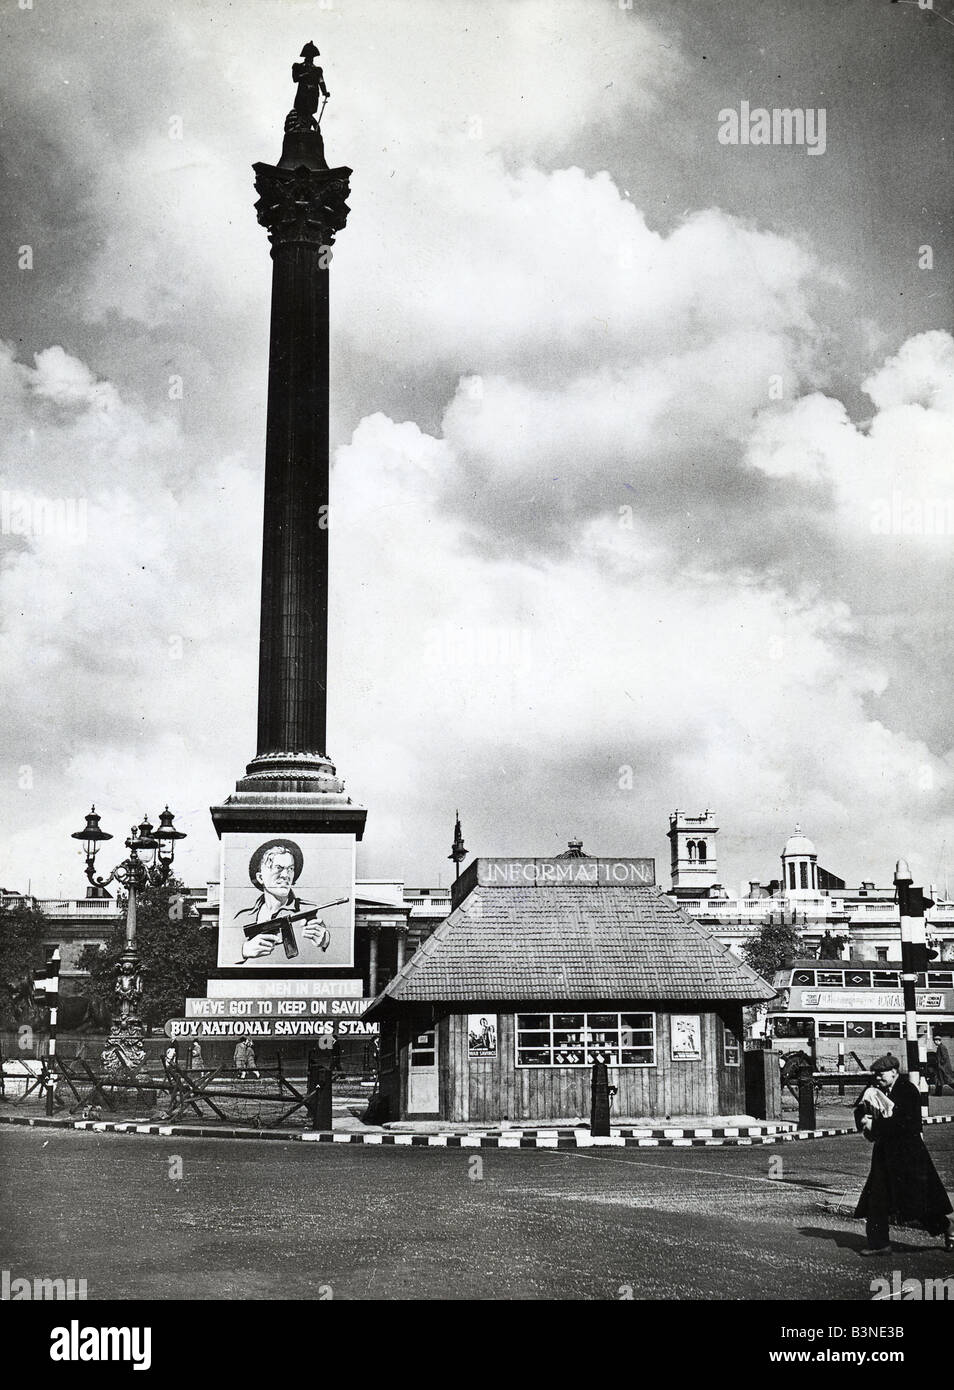 TRAFALGAR SQUARE London in 1942 with army recruiting poster Stock Photo